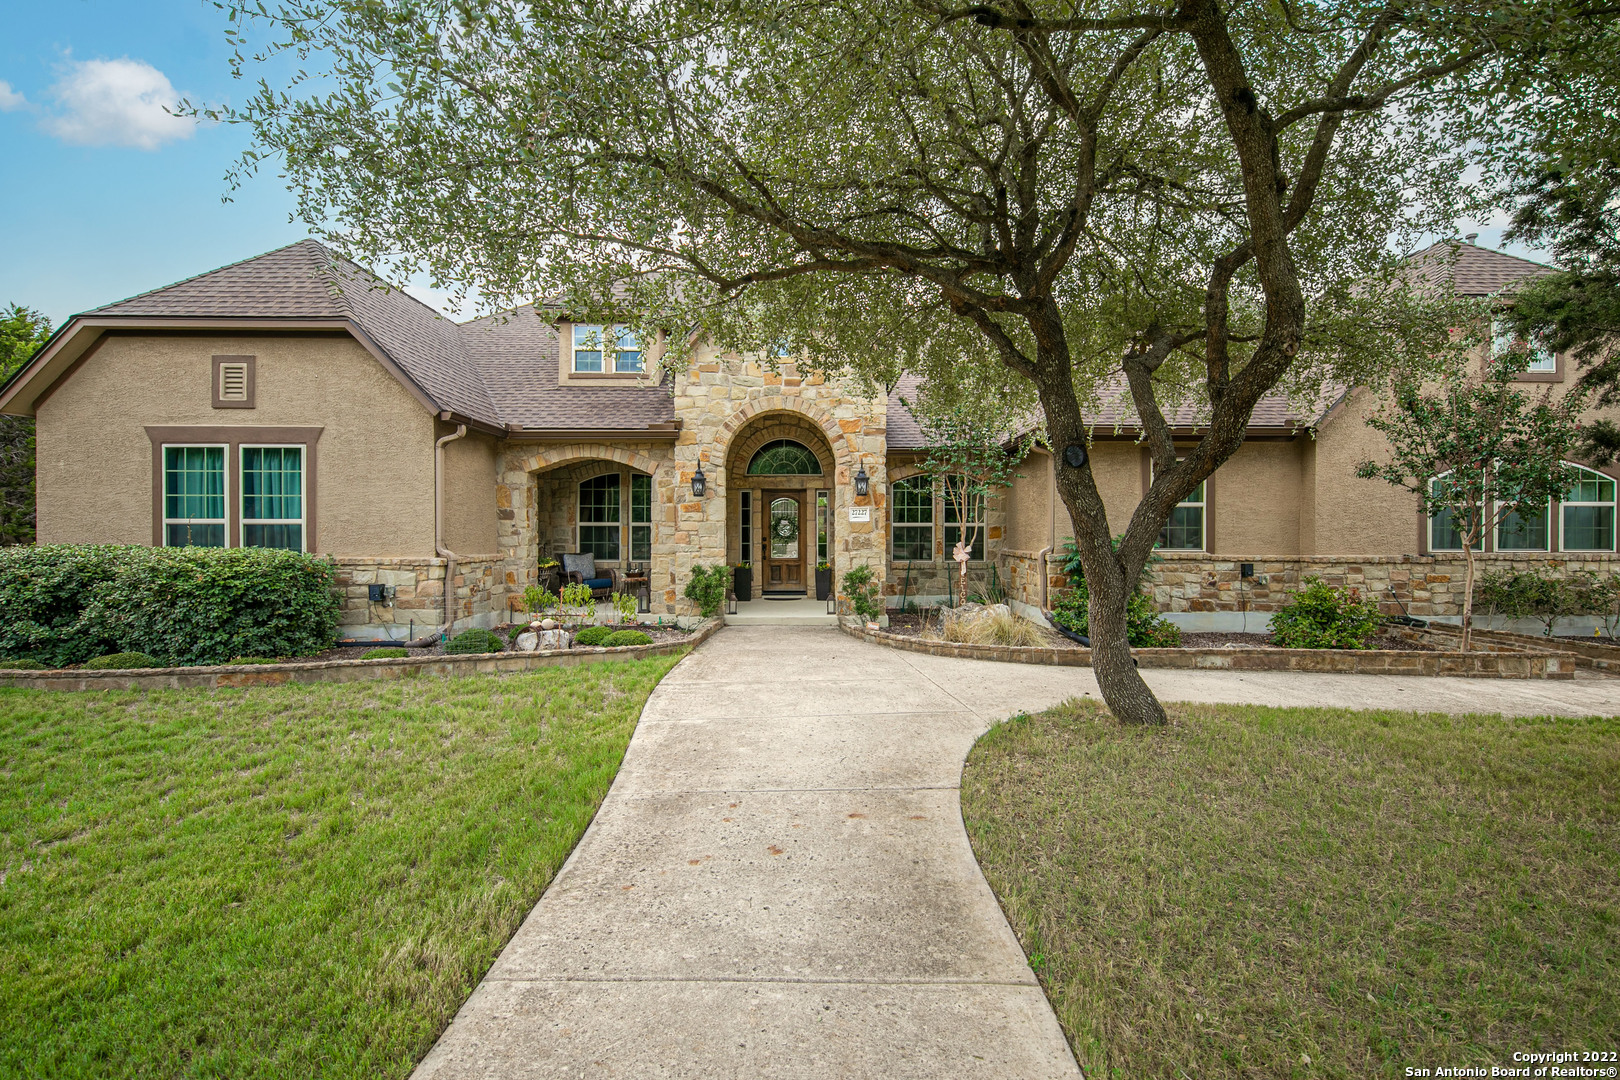 Nothing but beautiful, peaceful Hill Country living with this gorgeous custom home that sits on a 1.5-acre treed lot!  Located in the prestigious Rockwall Ranch community, this spectacular home features an open concept living space with the kitchen at the heart of it all!  Beautiful custom cabinets, a huge granite island, and quick access to the backyard make this an entertainer's dream.  The large outdoor covered patio and newly built seating area with a pergola are perfect for enjoying fall evenings outside. With the vast amount of private outdoor space this property offers, an additional dwelling or pool would be the perfect addition! The roomy master suite boasts separate his and hers walk-in custom closets, a garden tub and walk thru shower.  A game room and separate study allow for family fun and privacy at the same time.  Other features in this home include hand-scraped hardwood floors, a 3-car garage with epoxy floors, and a cozy sunroom. Conveniently located within a short distance of the neighborhood pool, playground and sports courts.